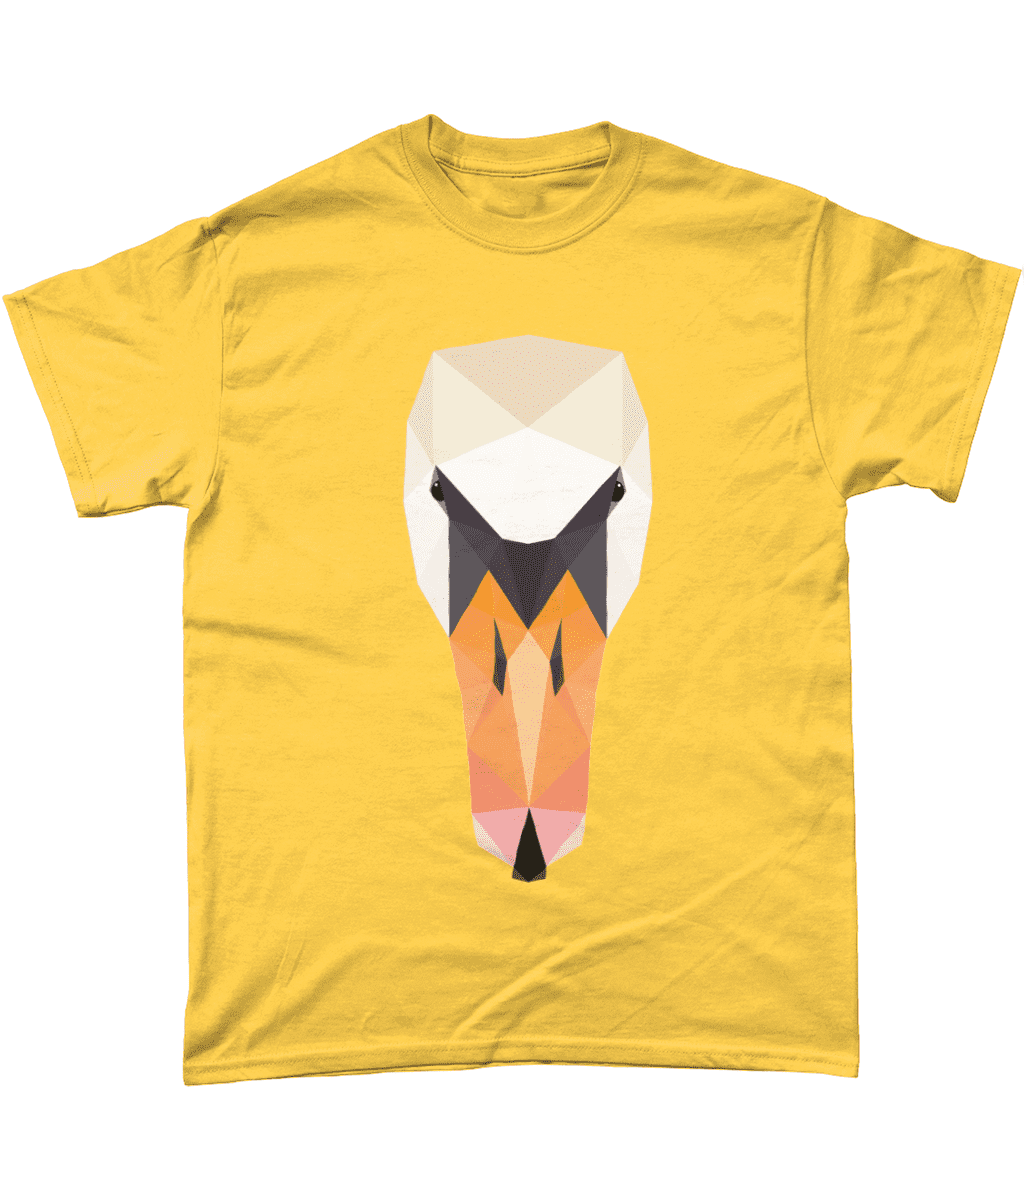 Low Poly Swan T Shirt Daisy